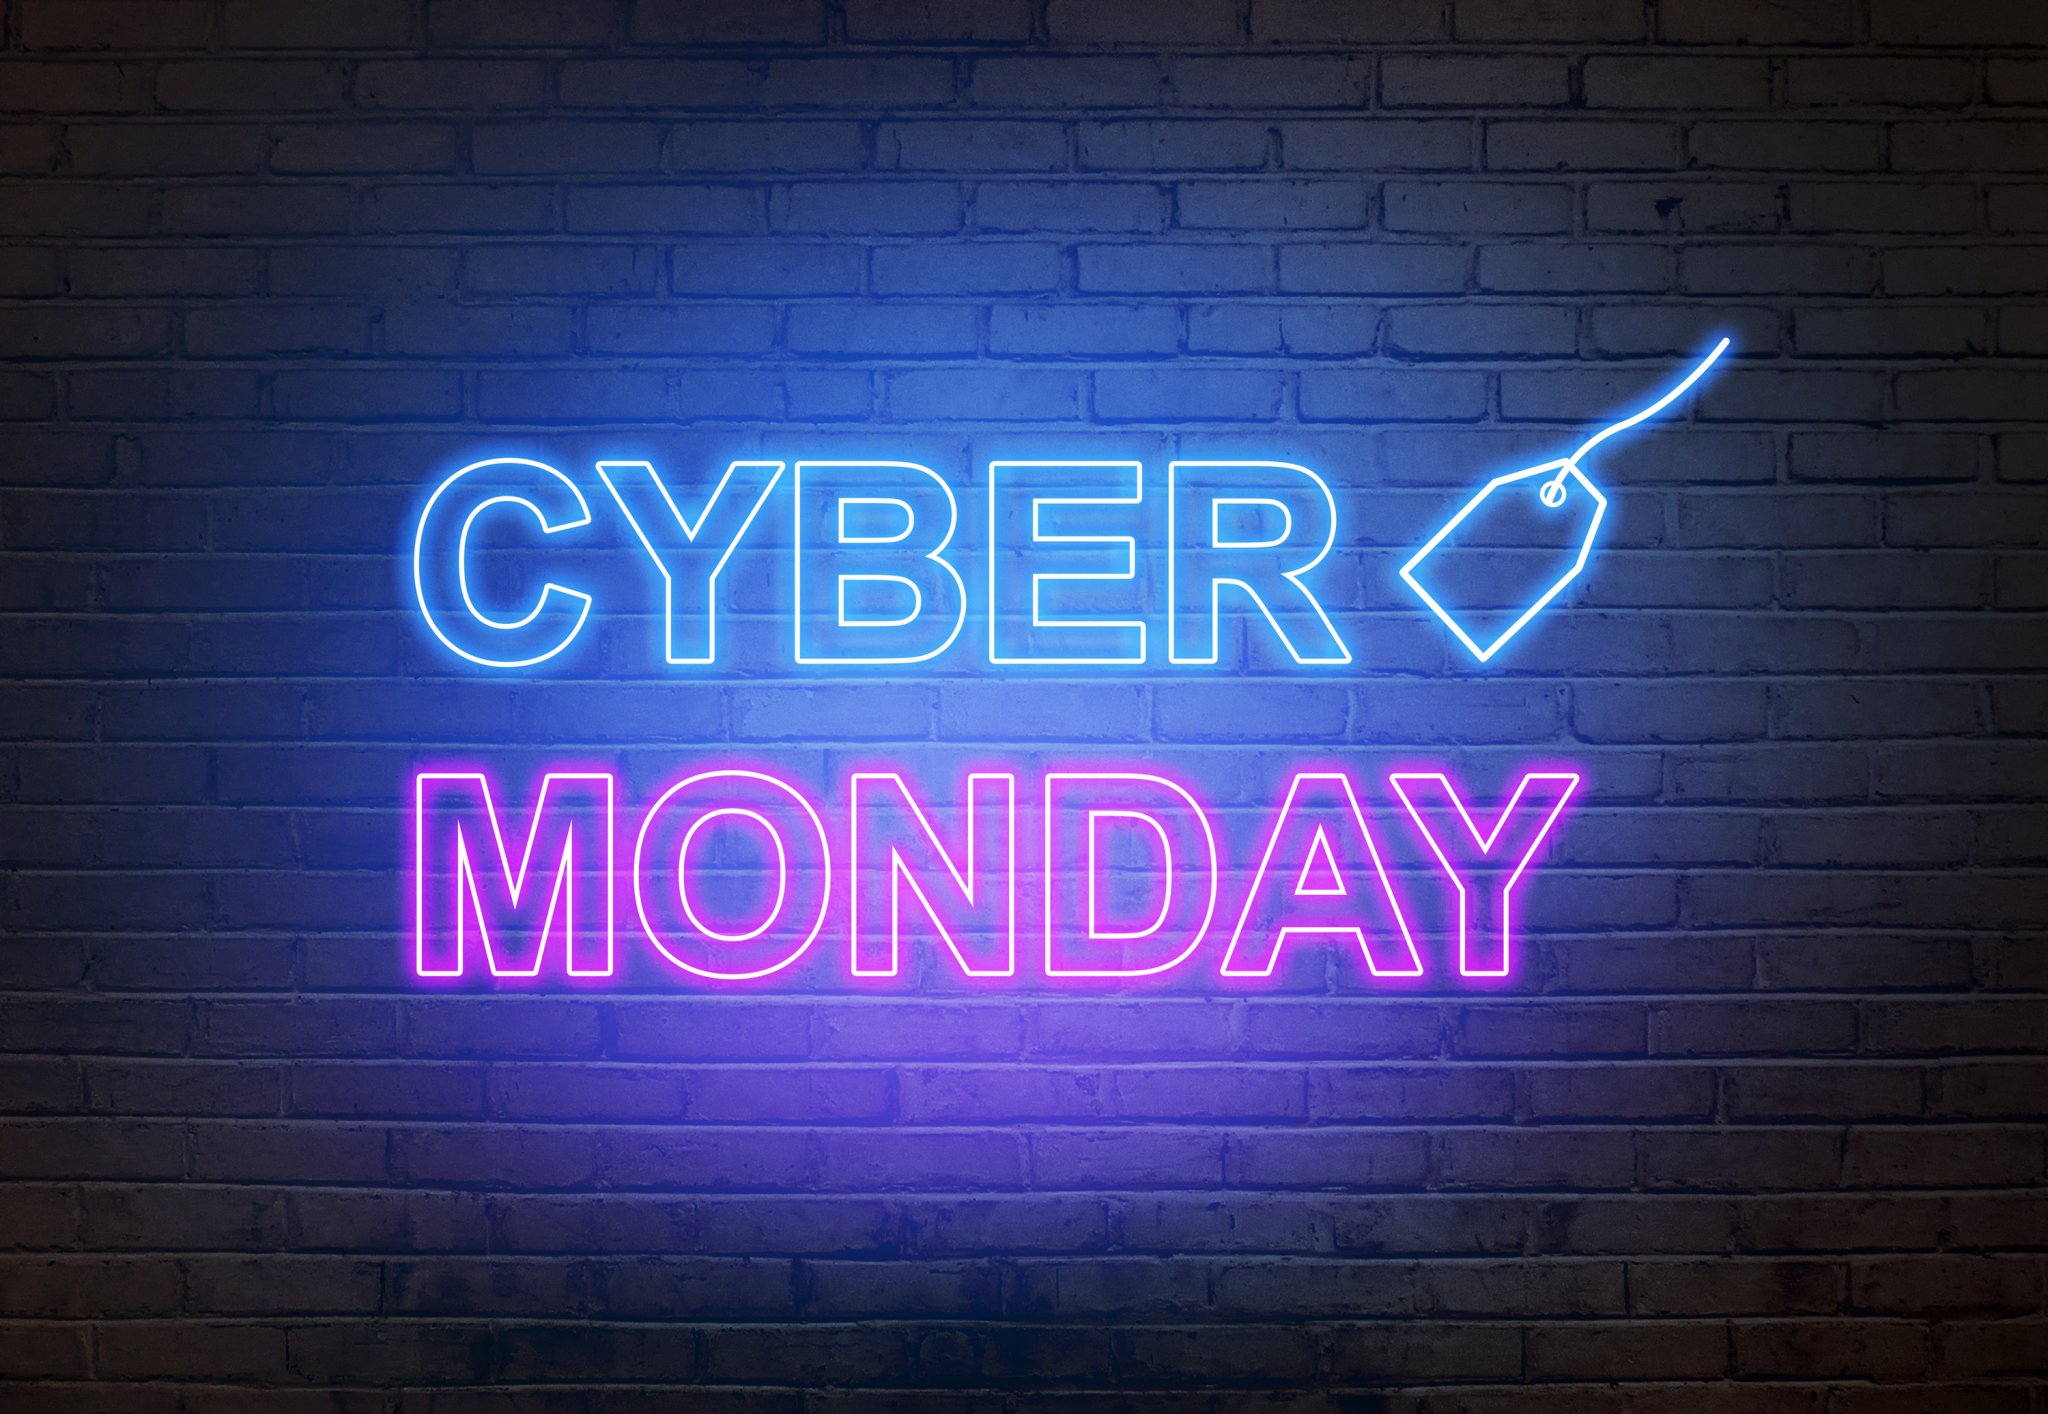 Where to get Cyber Monday online deals in Japan